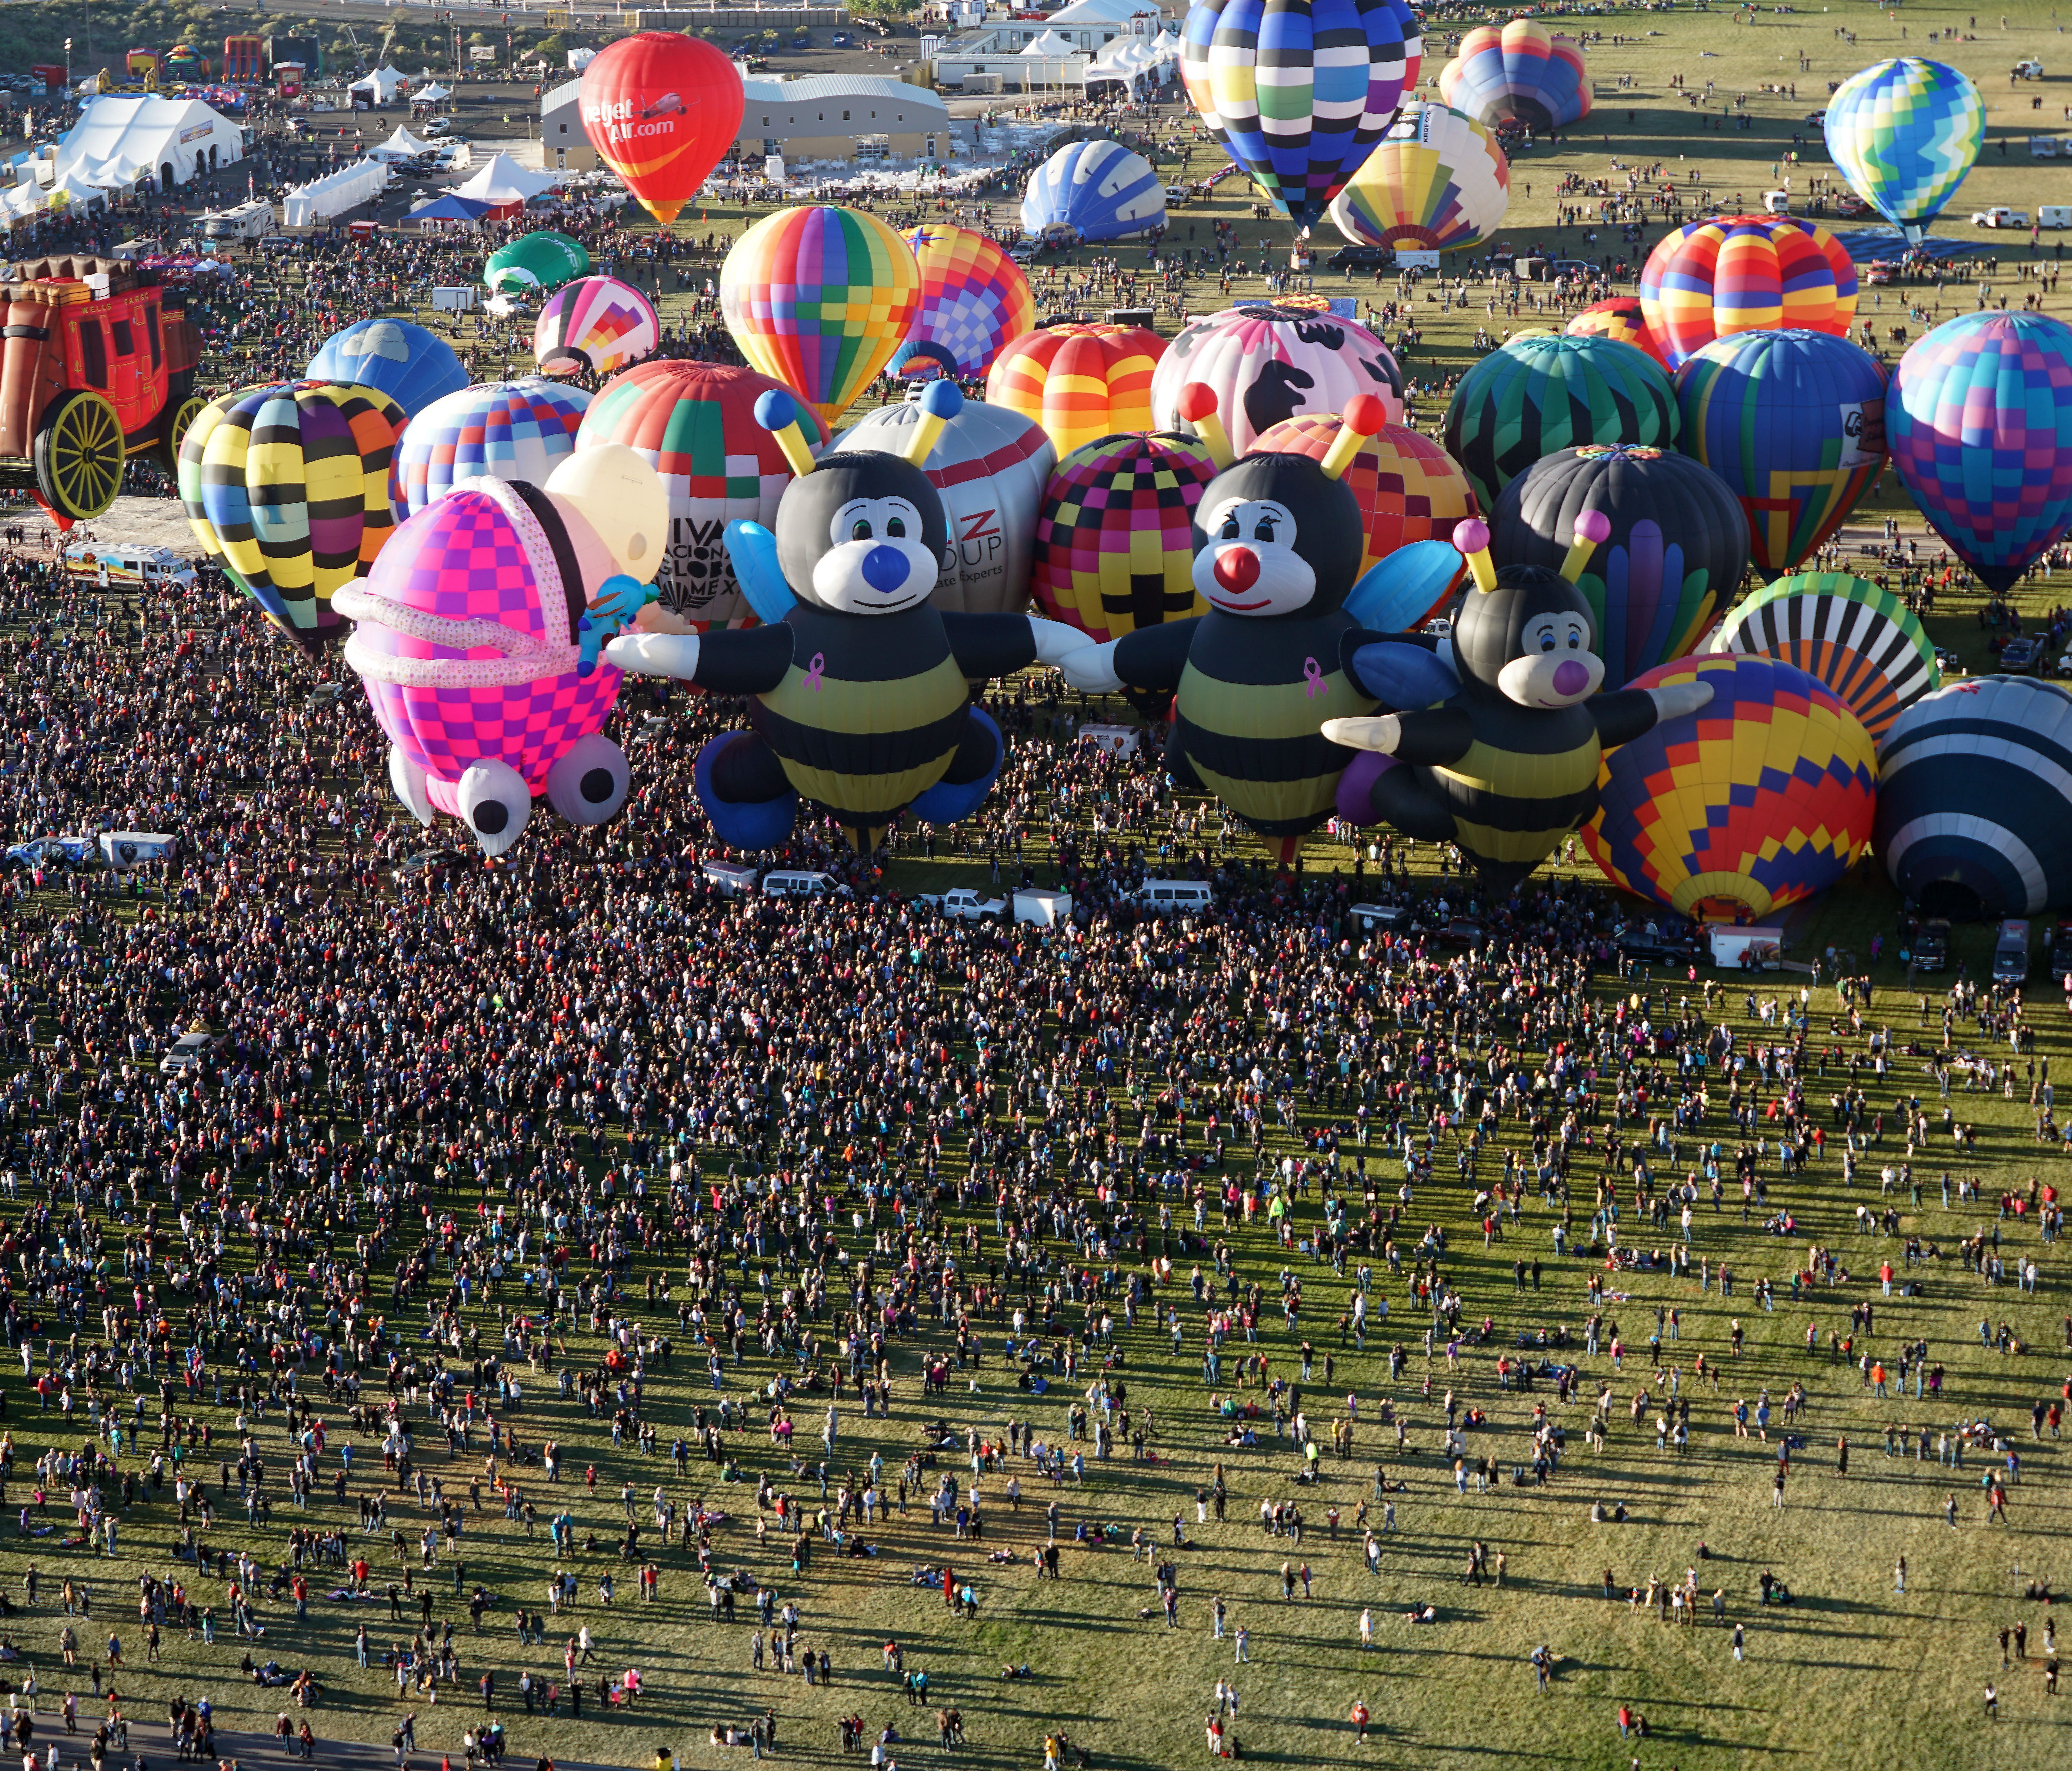 A massive crowd gathers to watch the morning mass ascension of balloons during the 2017 Albuquerque International Balloon Fiesta on Saturday, Oct. 14, 2017.         